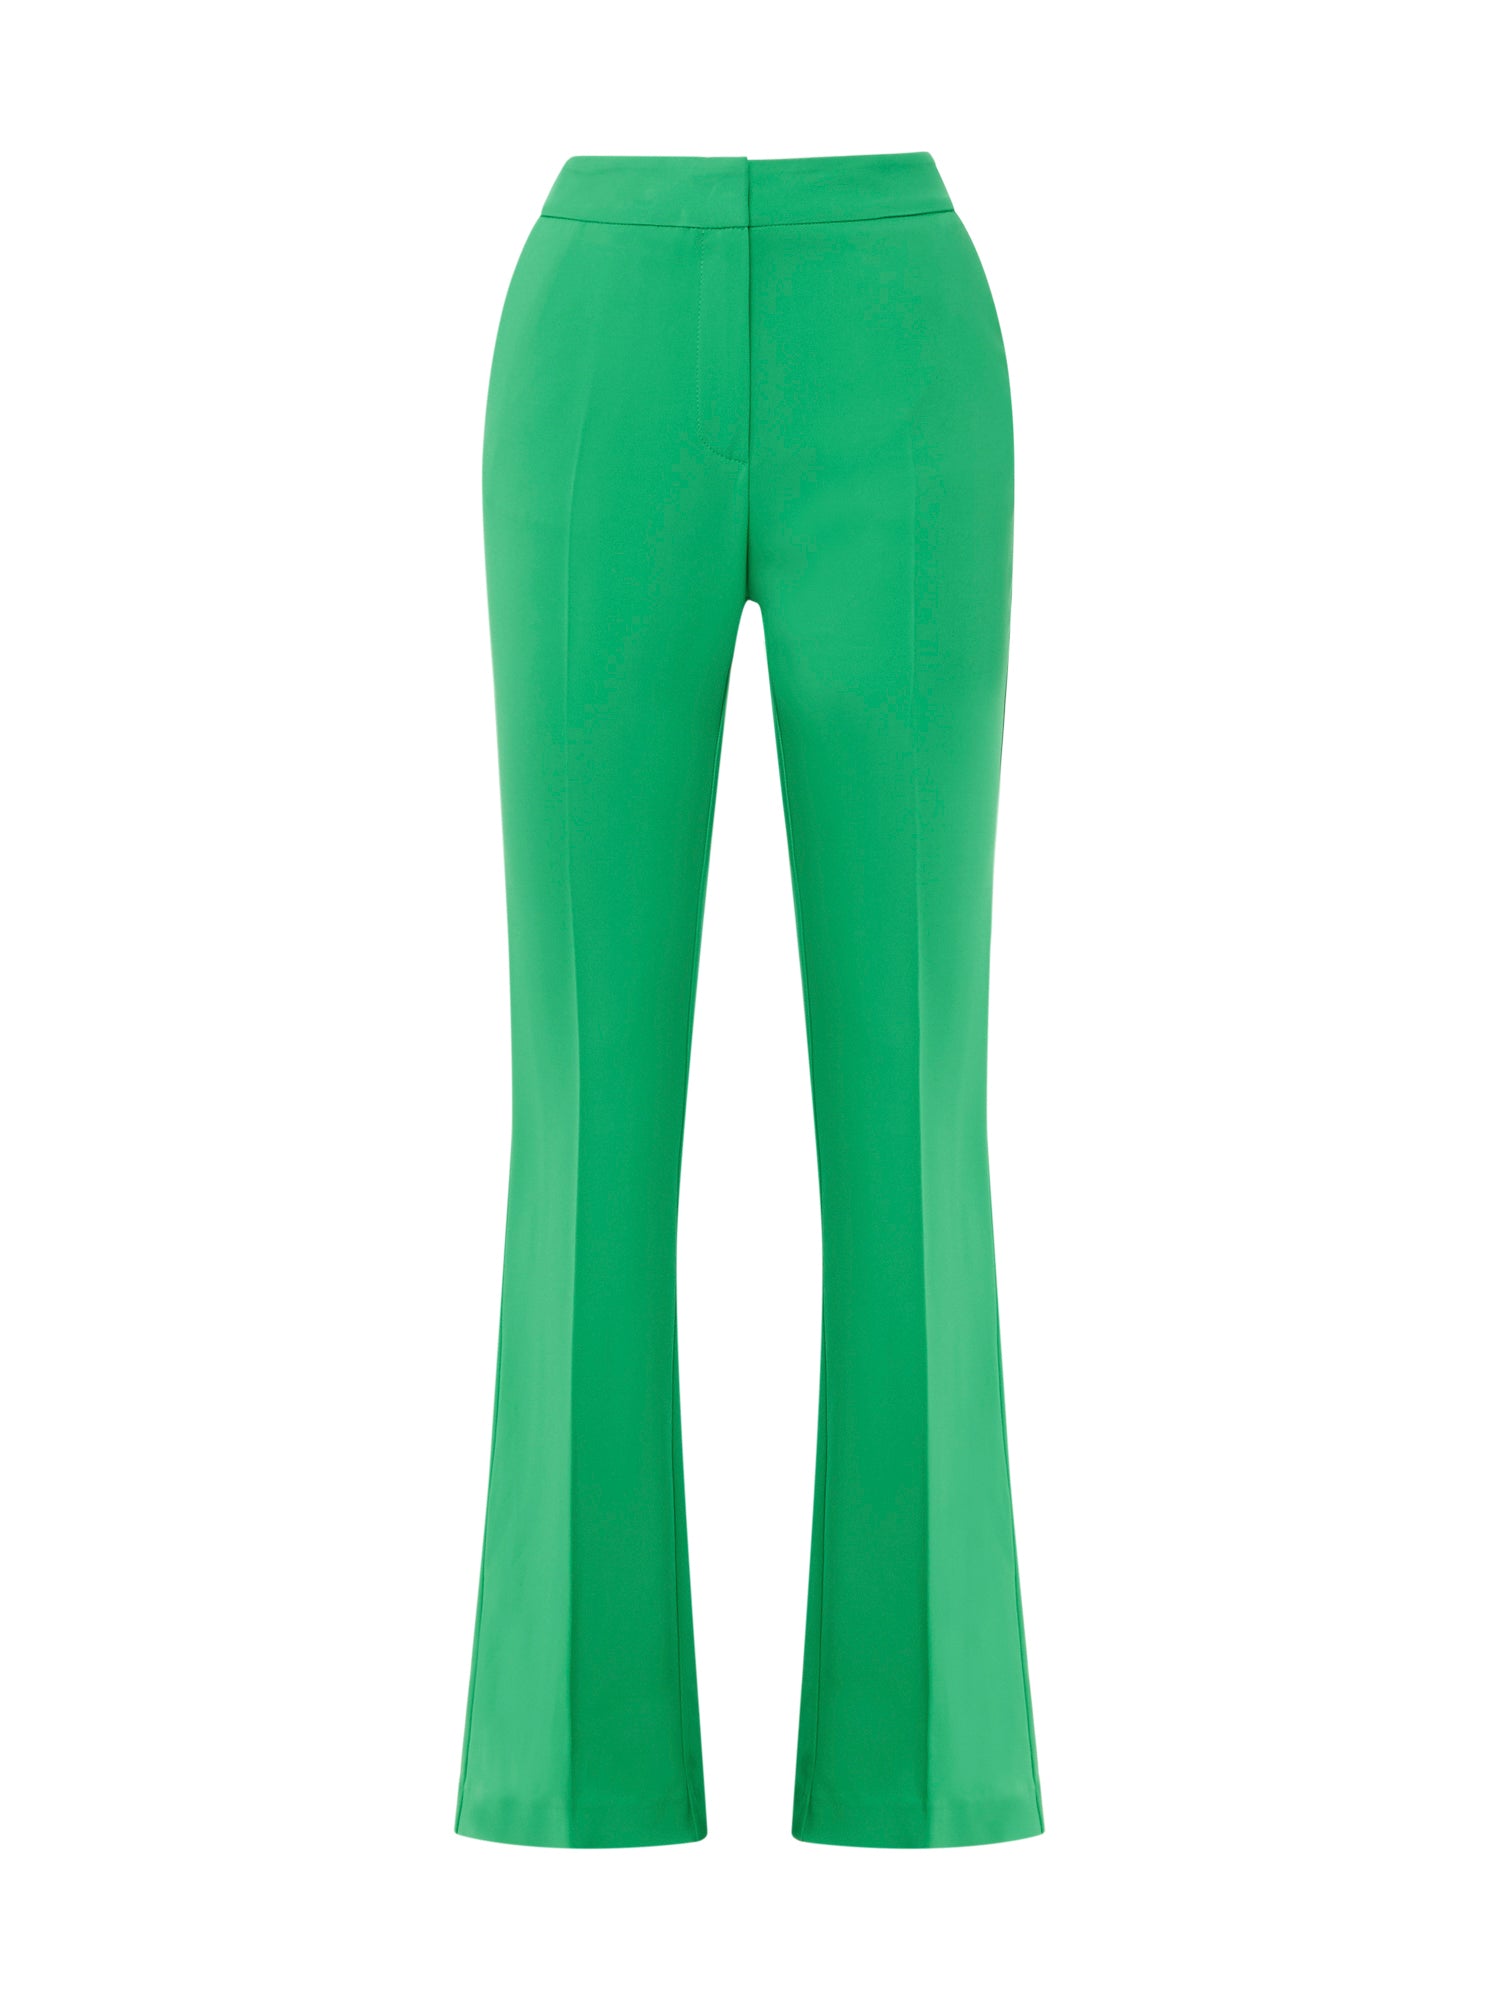 Basic flare trousers